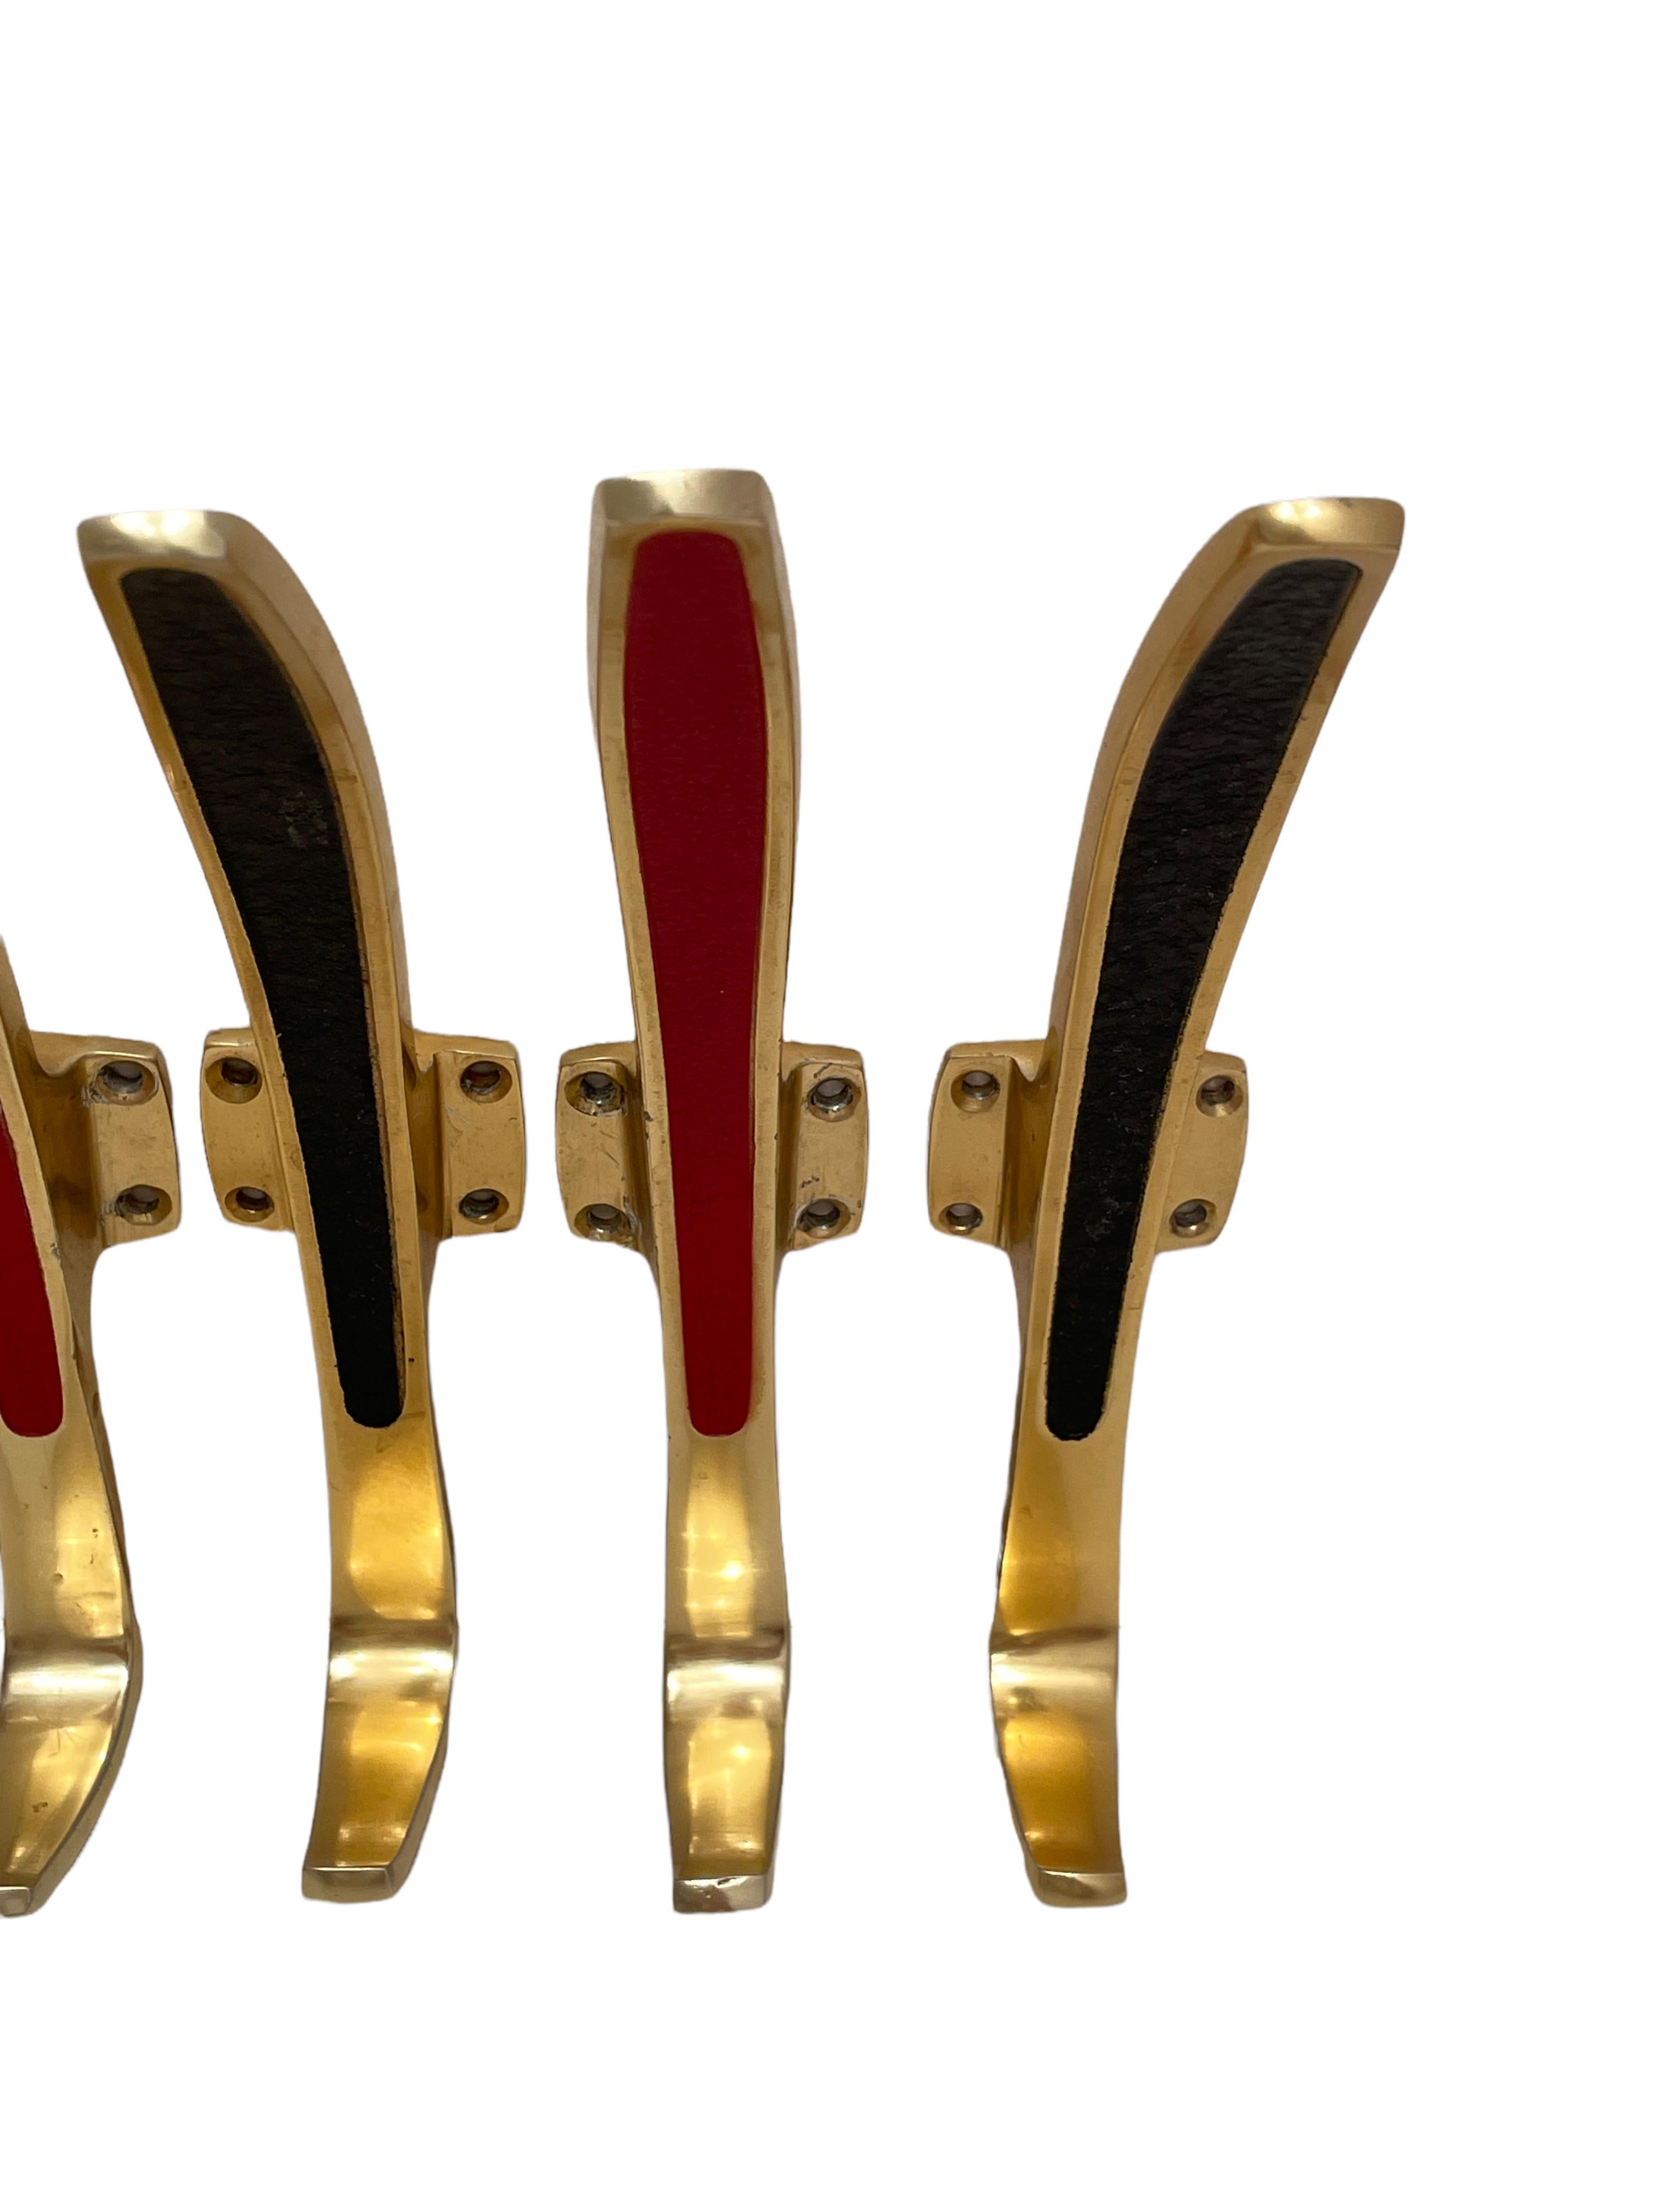 Set of Five Coat Wall Hooks, Black and Red, Mid-Century Modern, 1950s For Sale 1